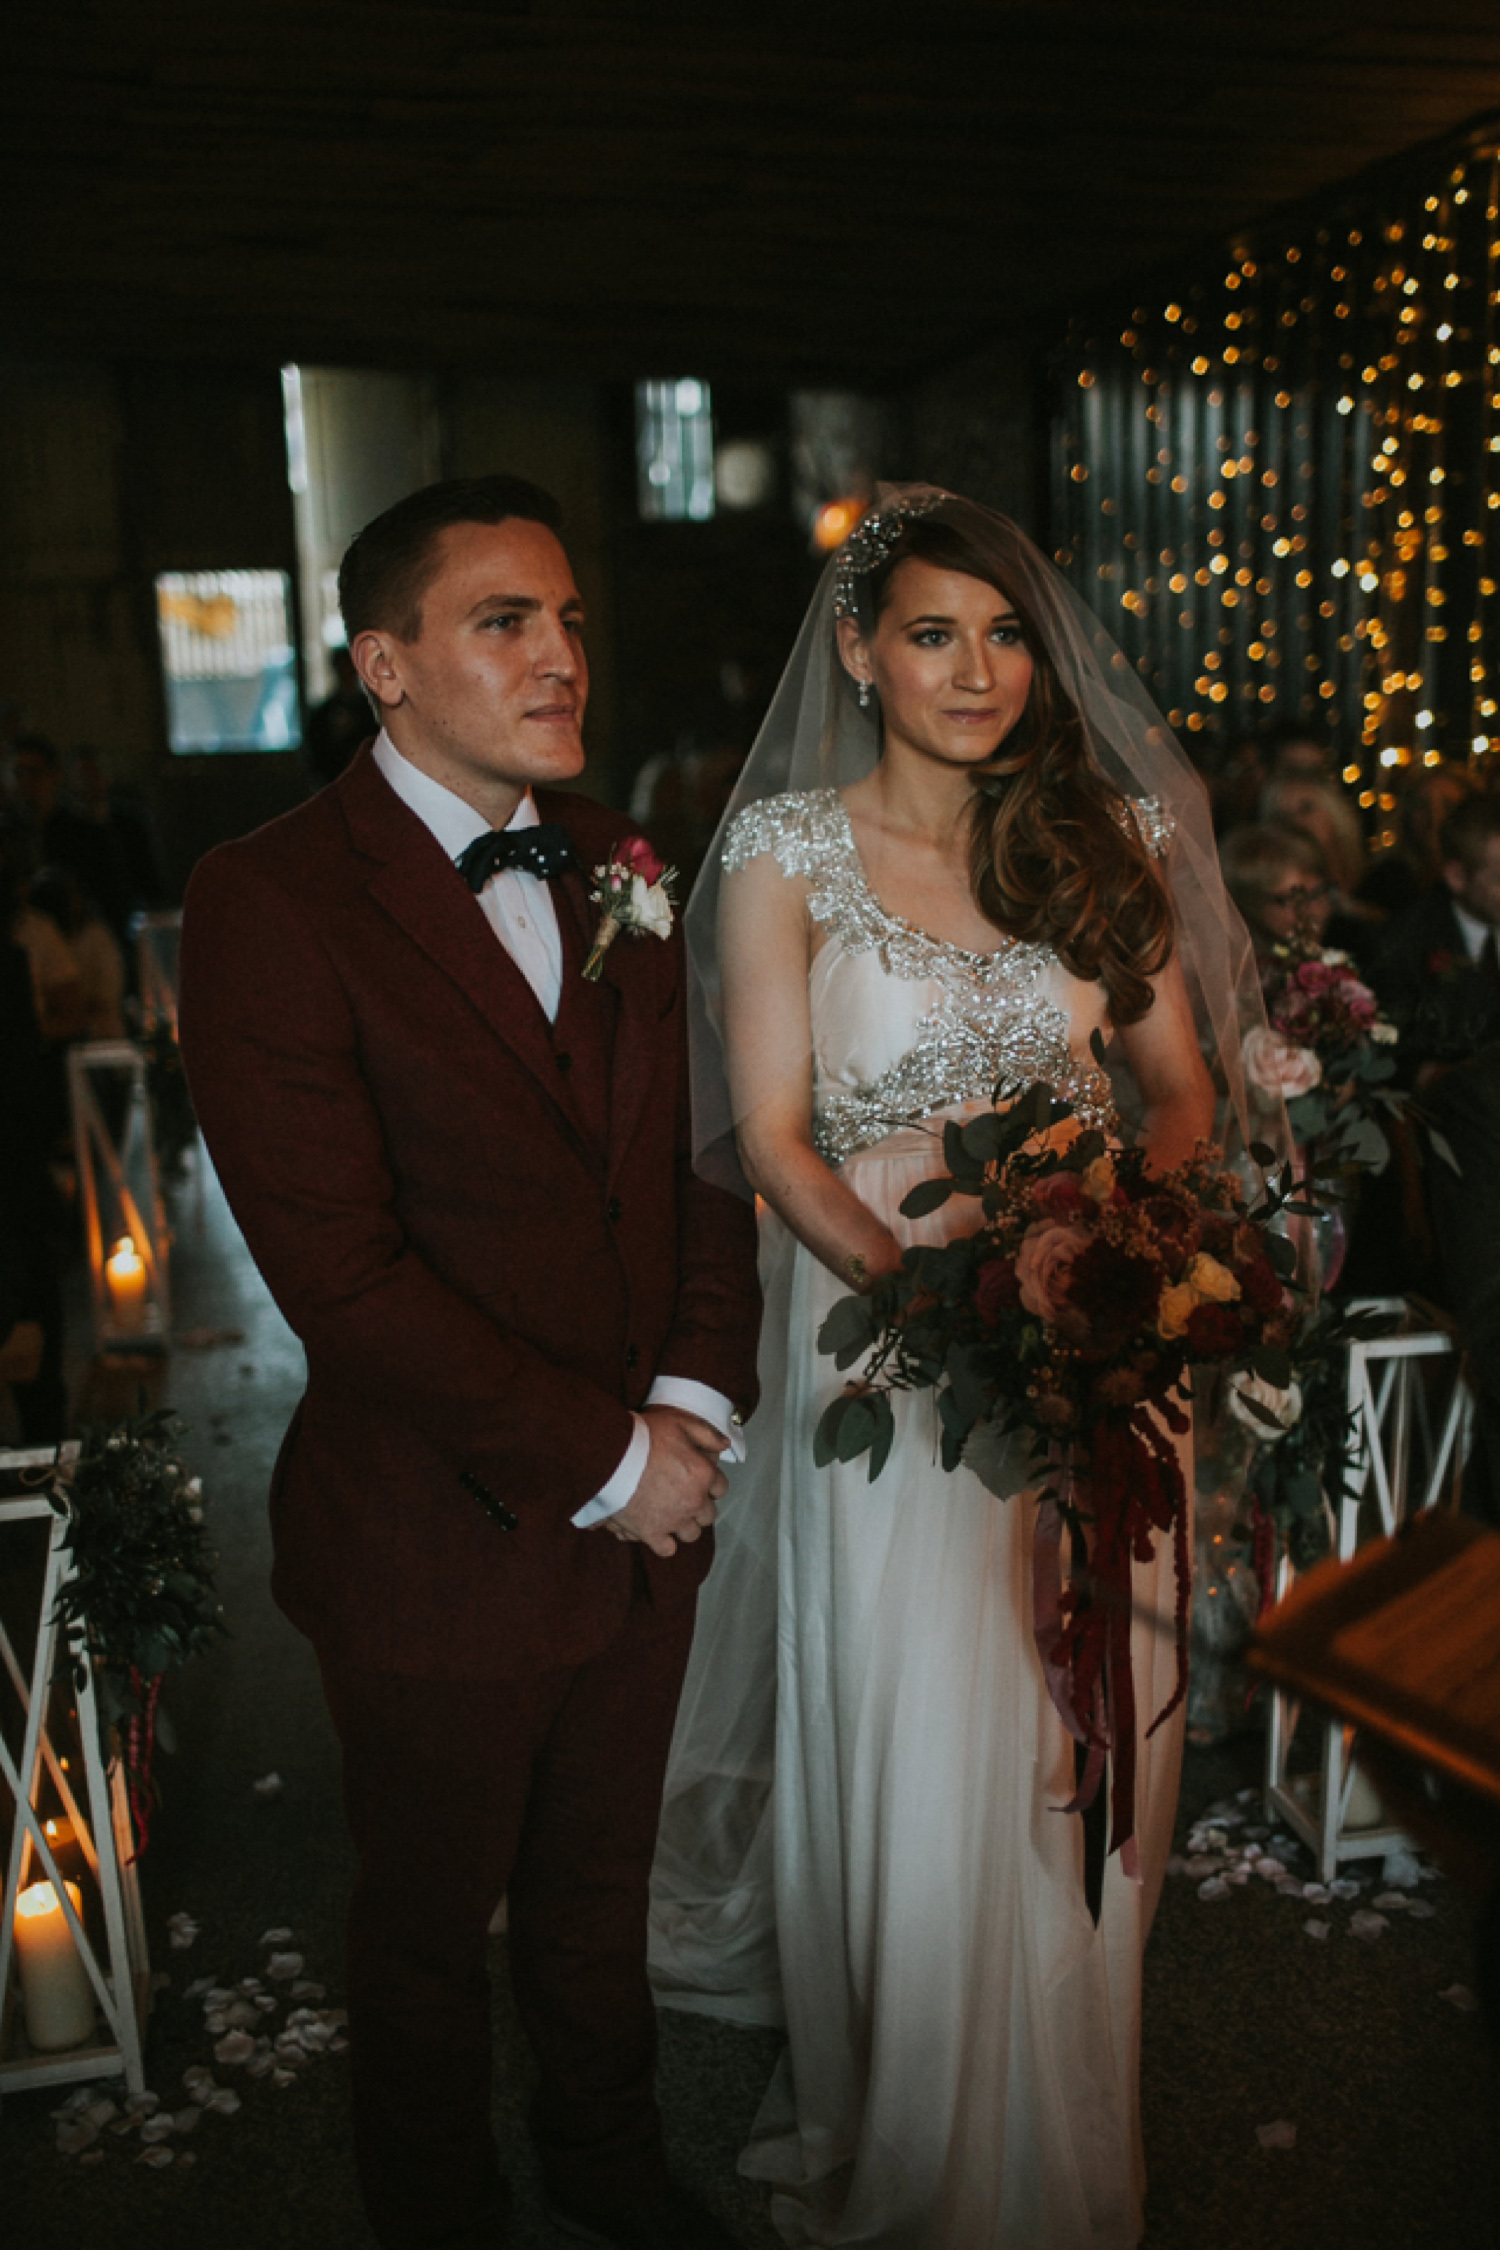 Alicia wore an Anna Campbell gown for her 1920's inspired rustic winter wedding. Photography by DSB Creative.